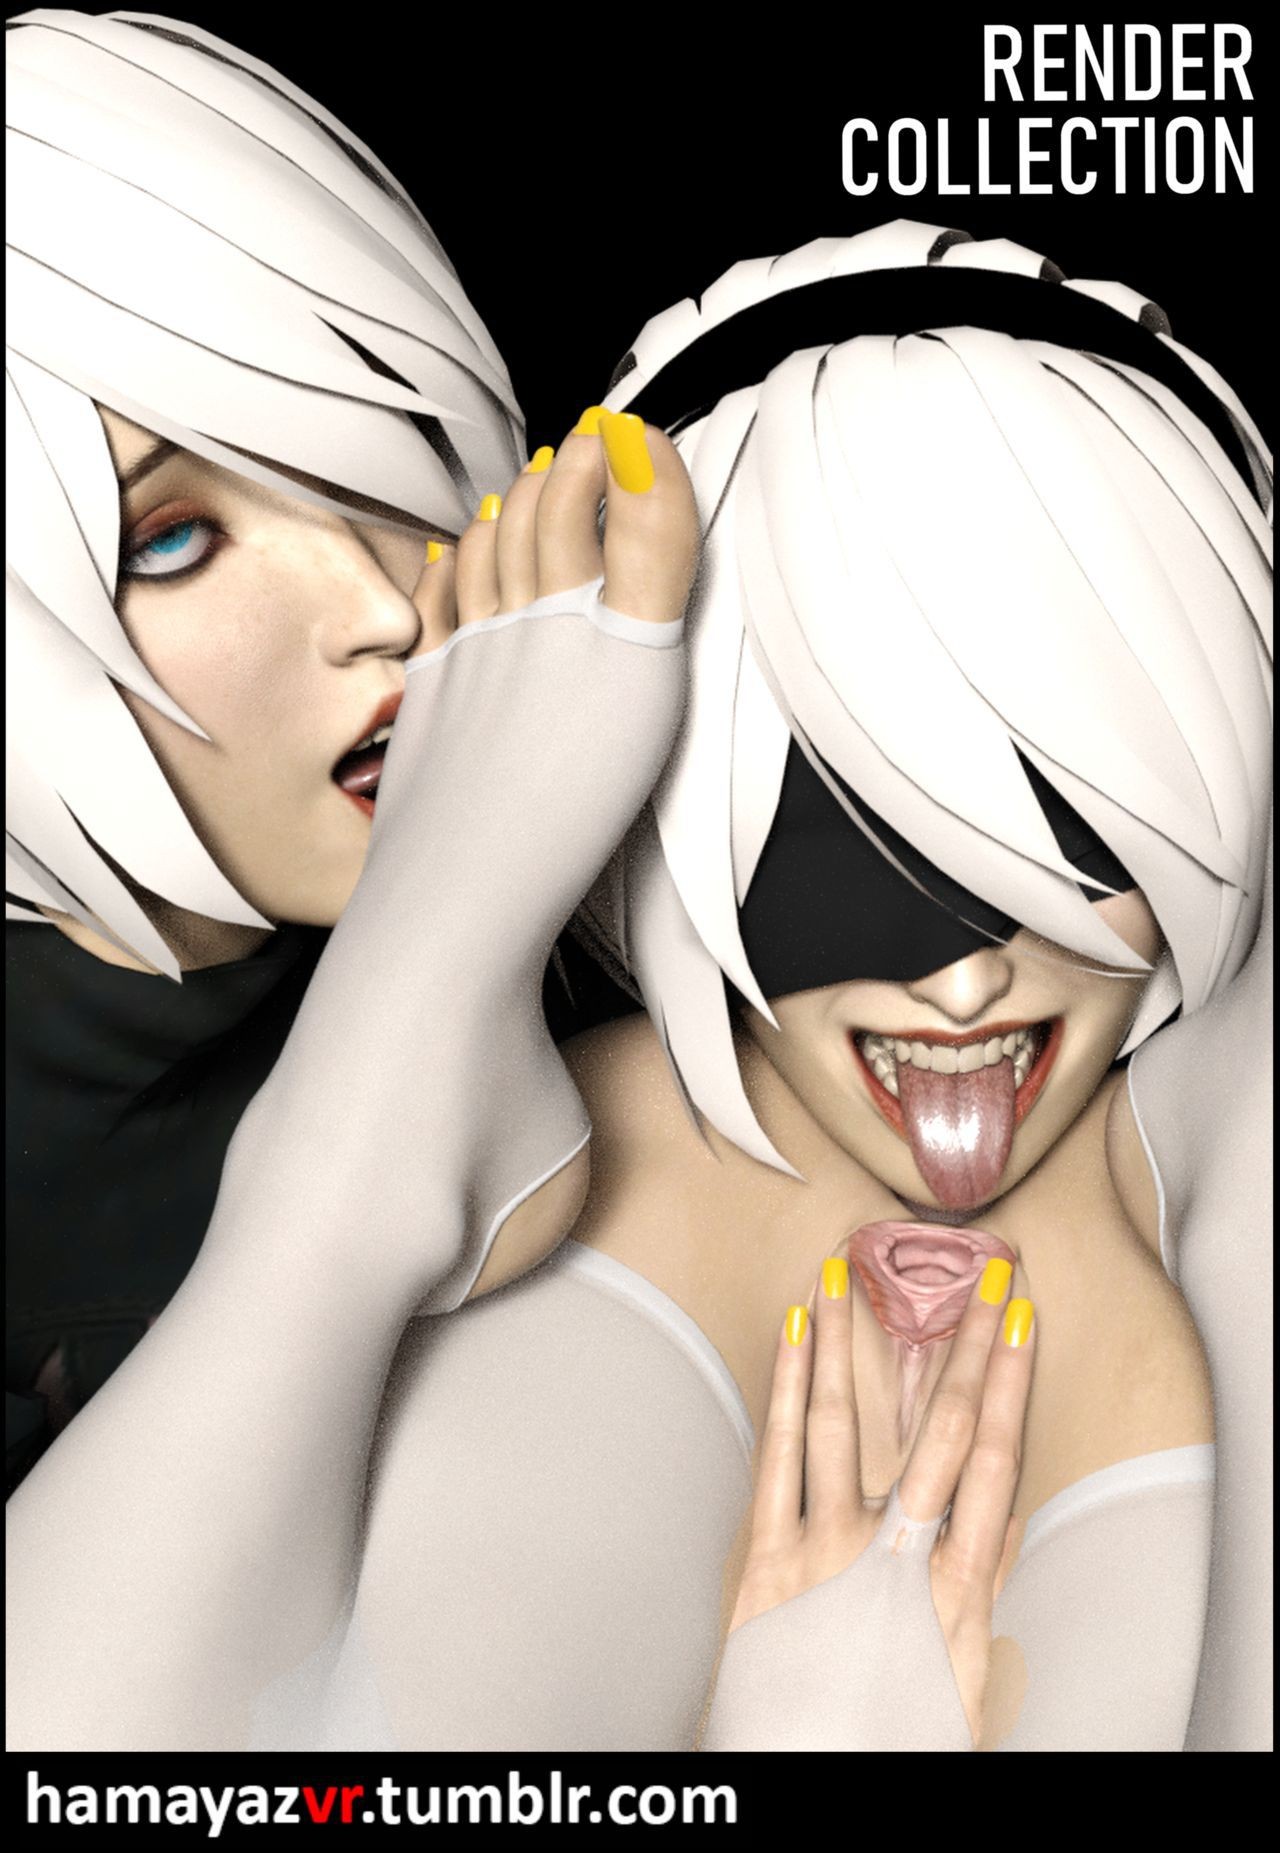 Fisting [hamayaz] Render Collection (Ongoing) Negra